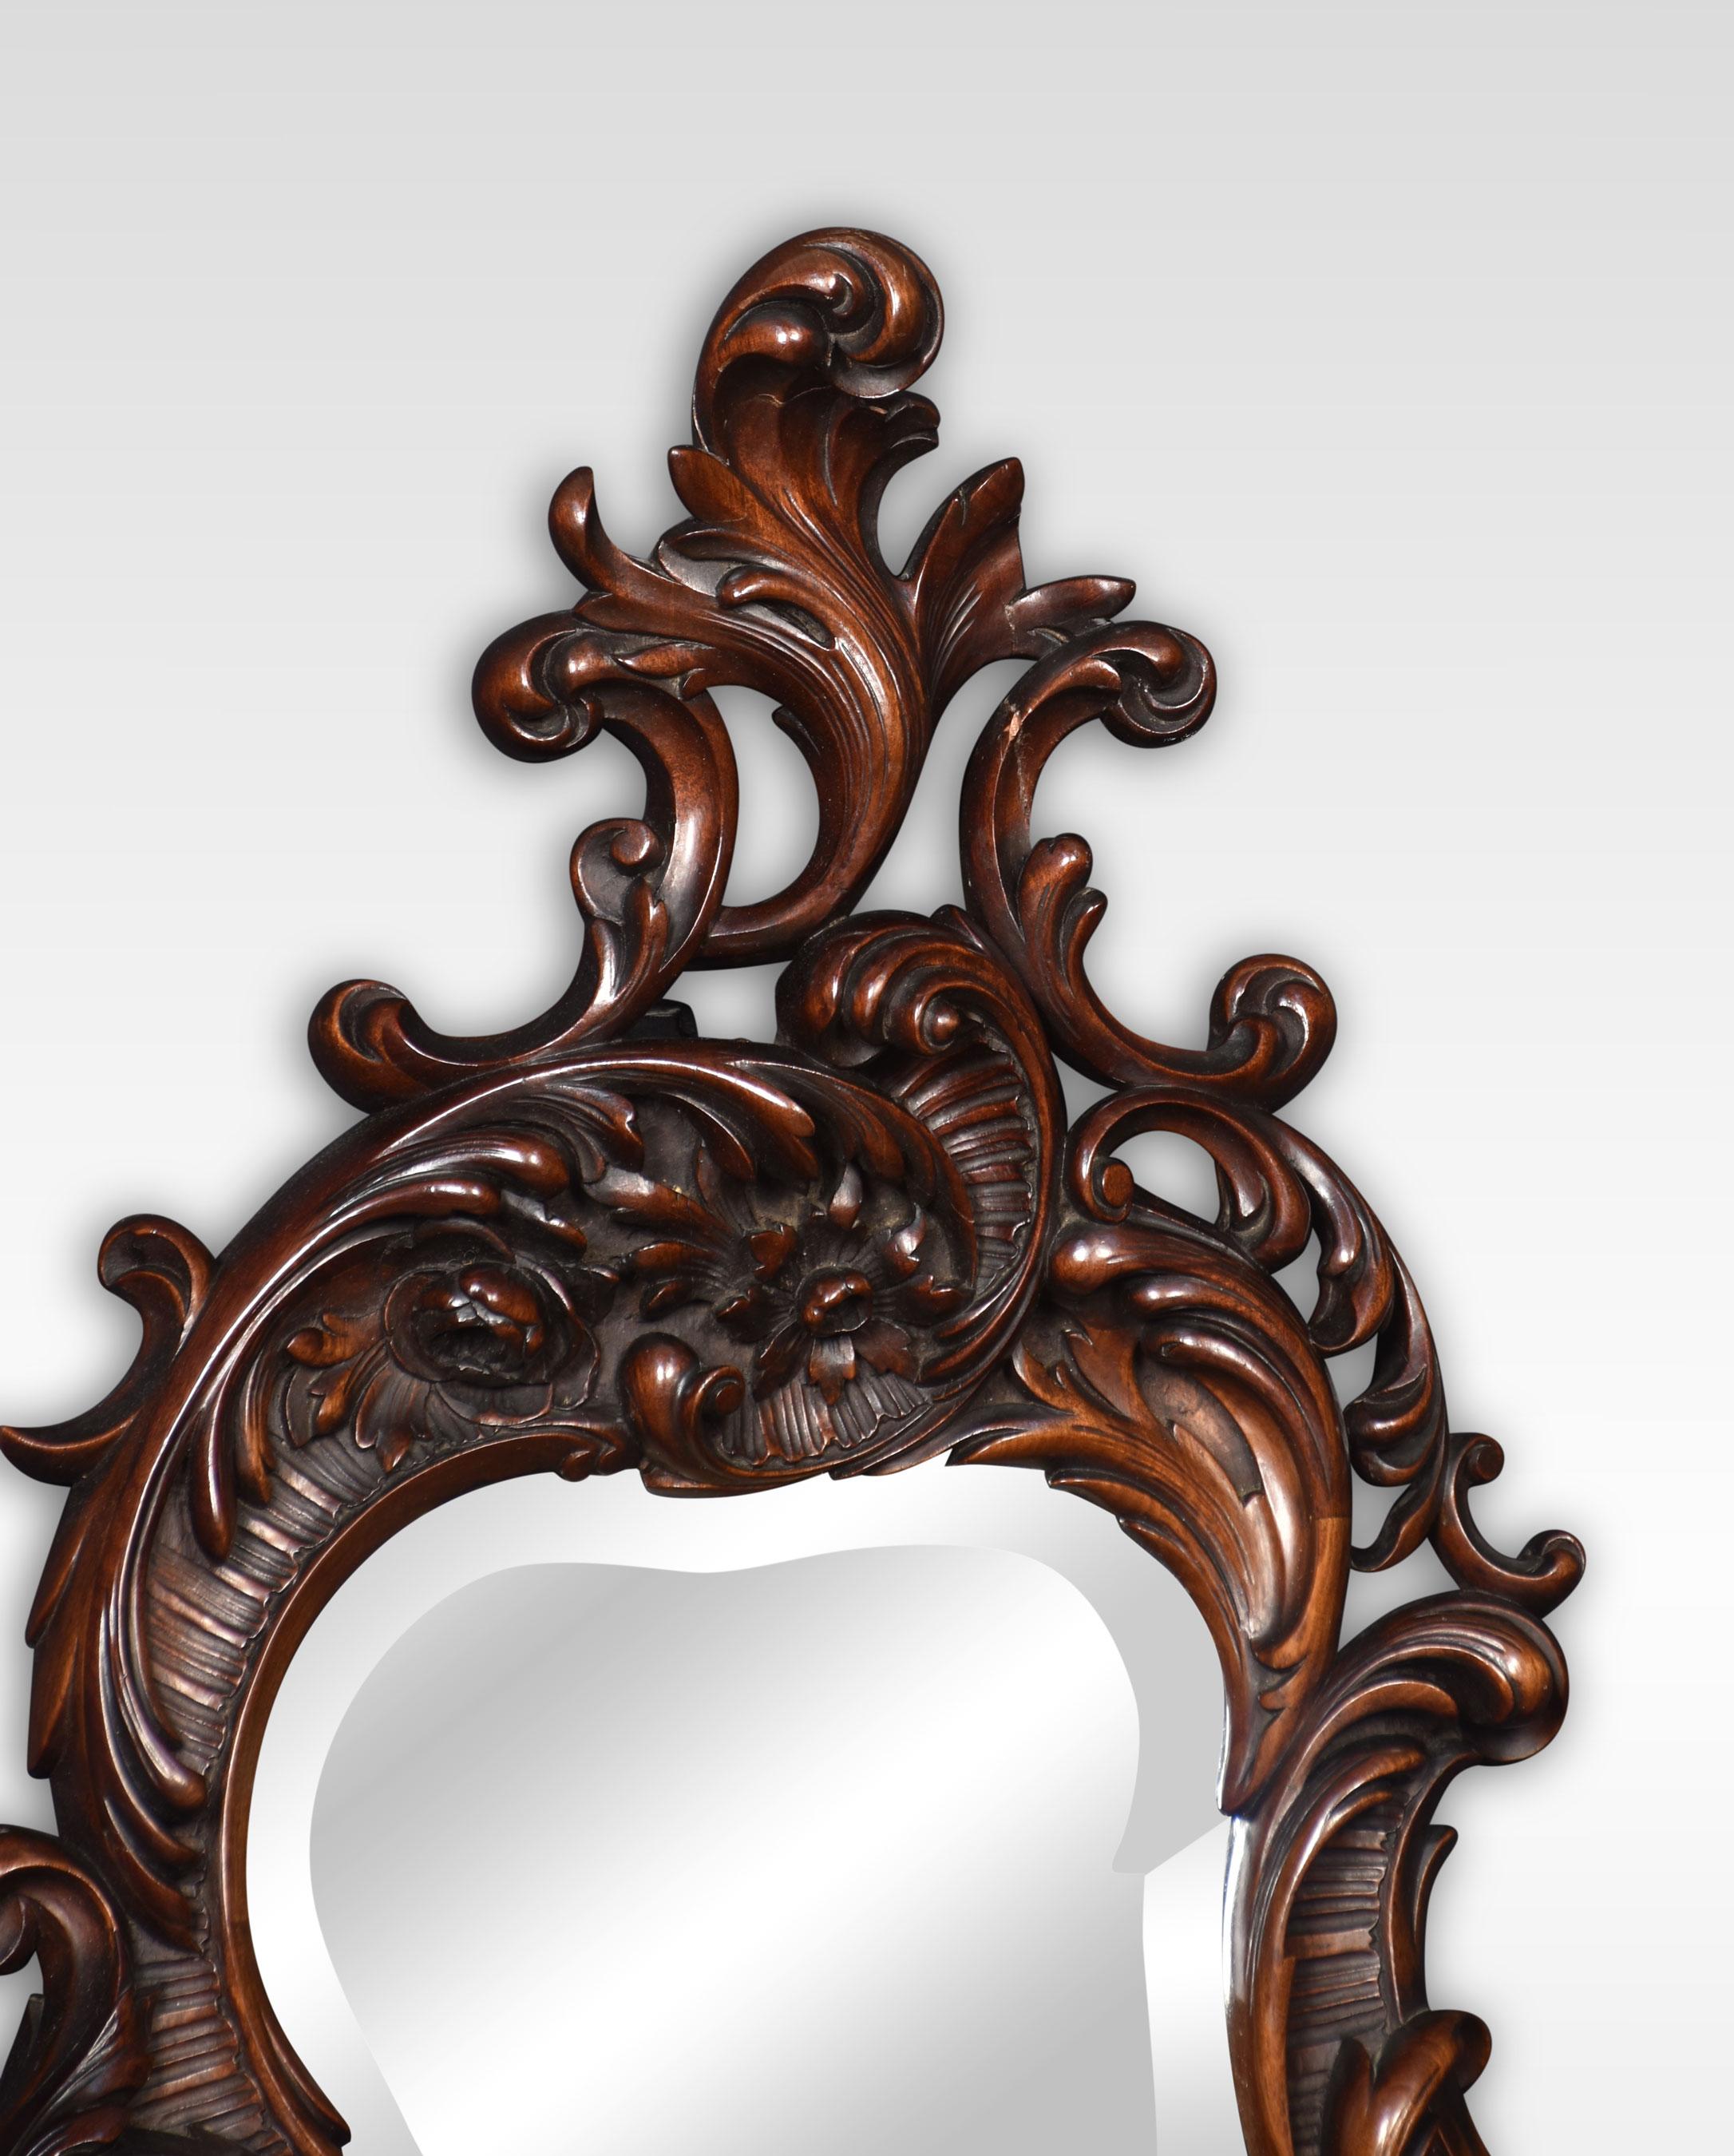 Rococo Revival Mahogany Wall Mirror In Good Condition For Sale In Cheshire, GB